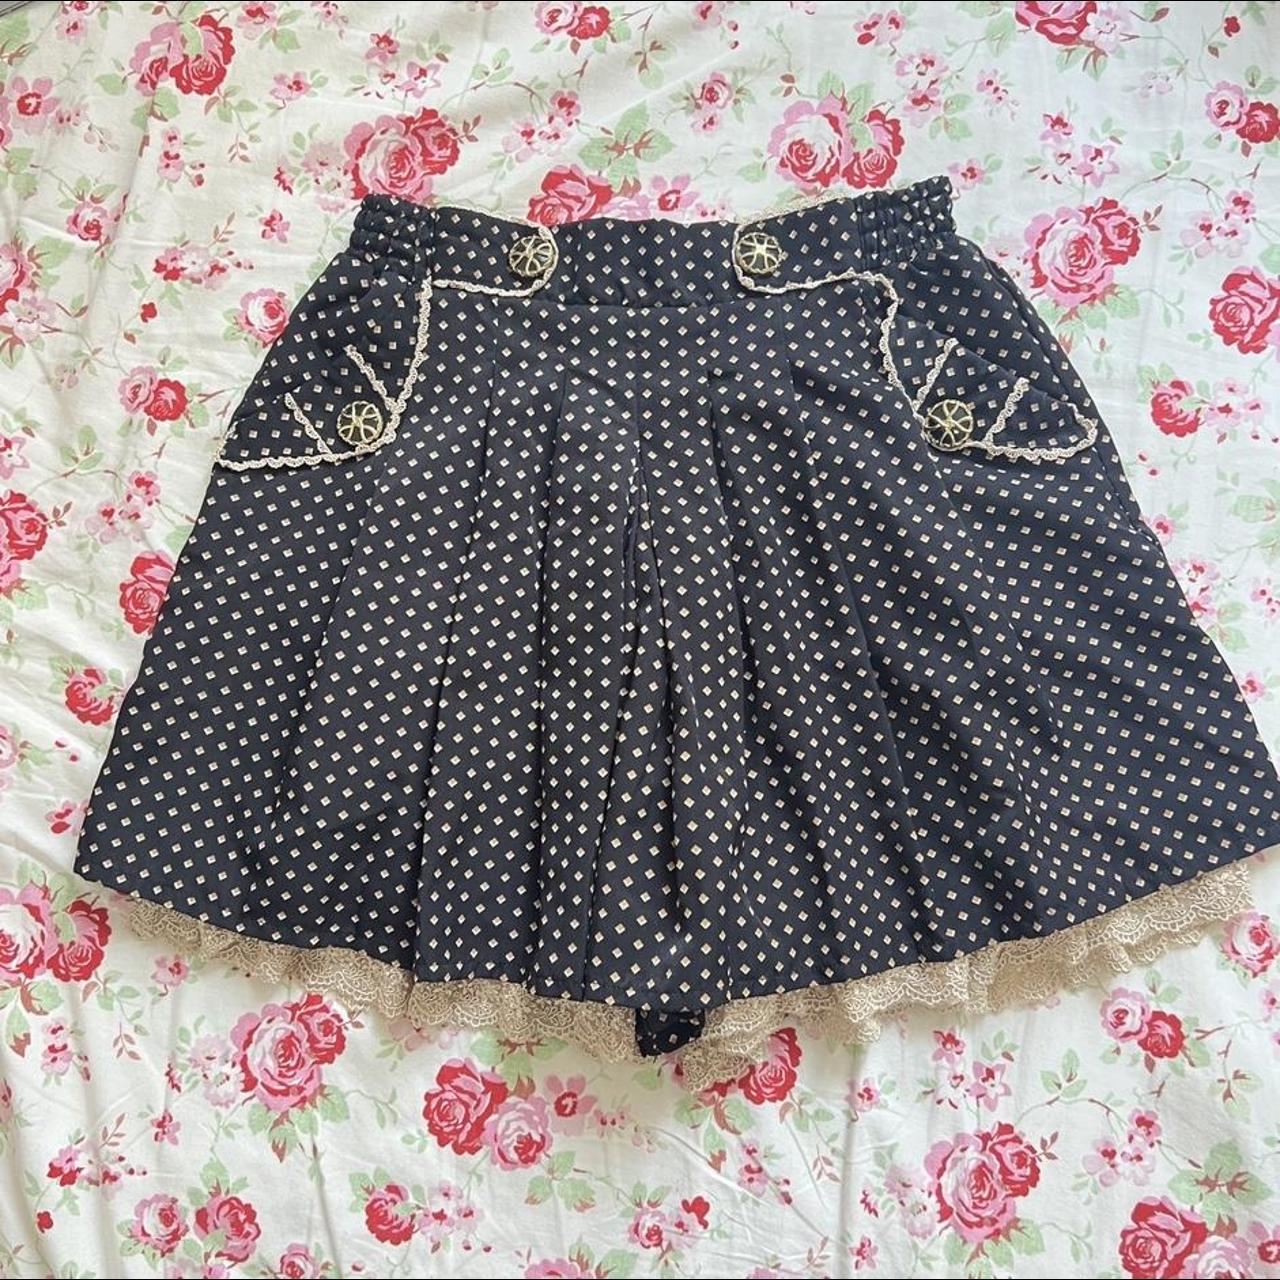 Axes femme skirt/shorts. They look like skirt but